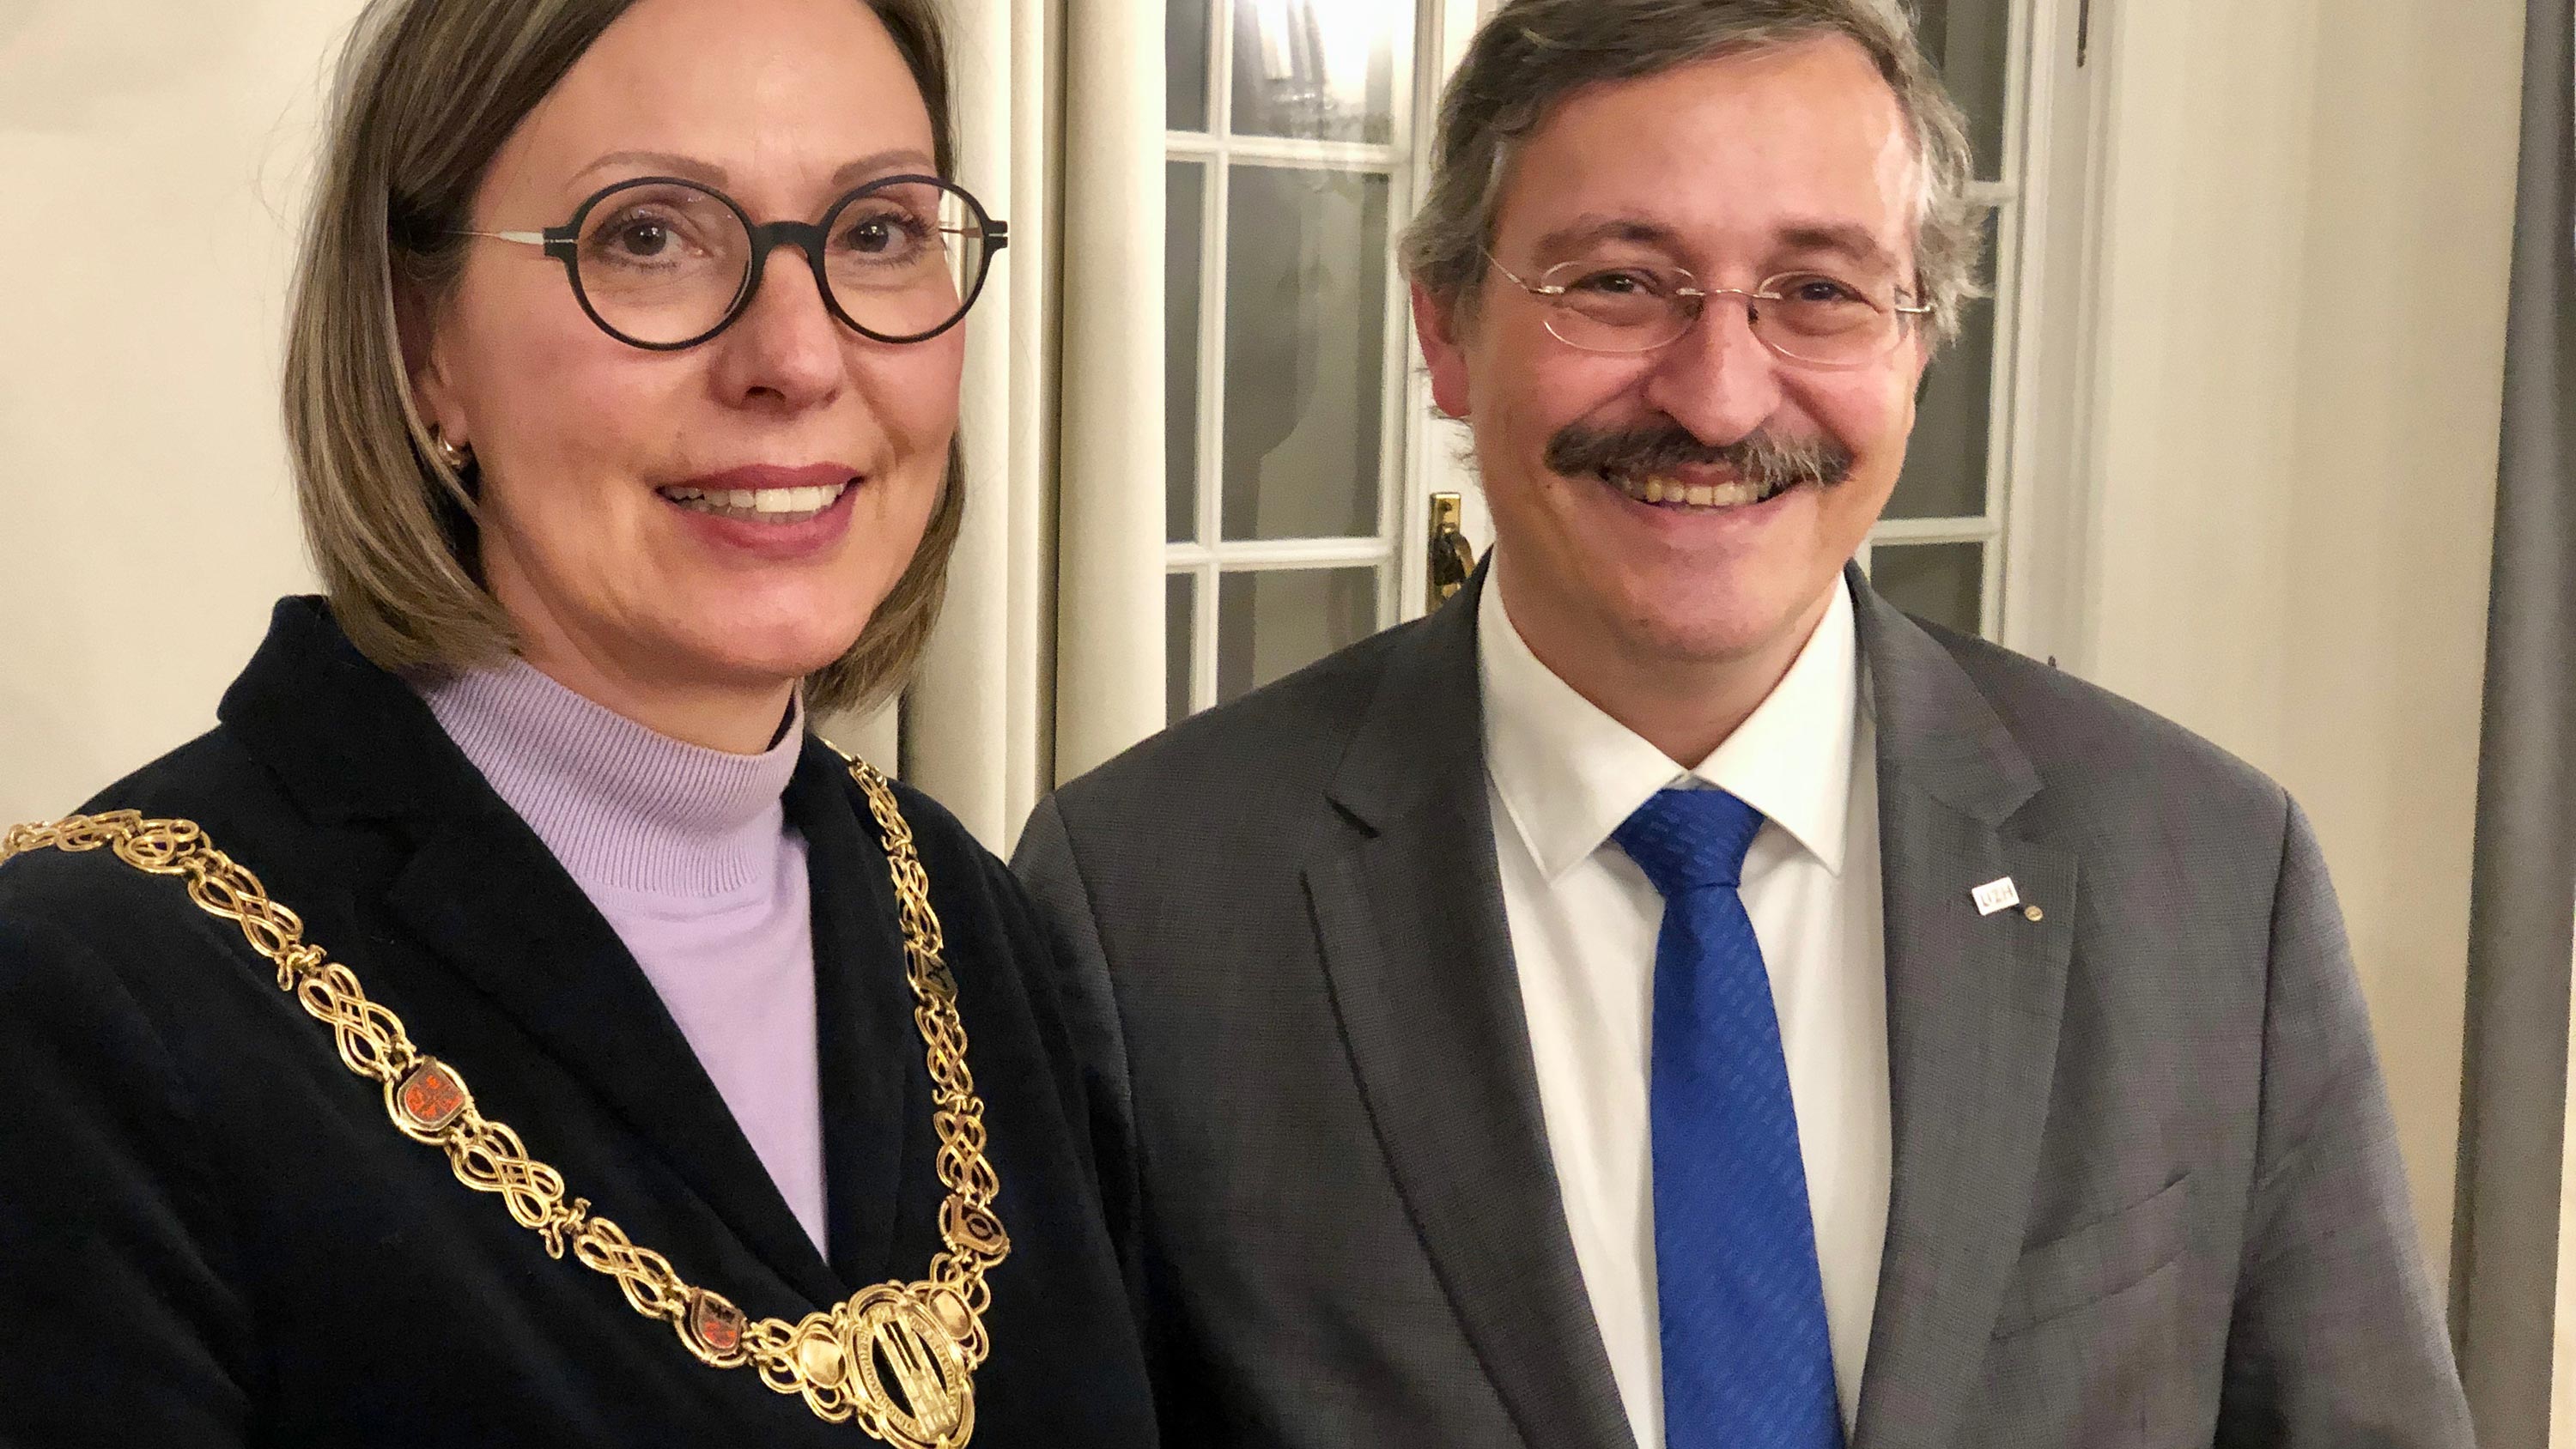 The presidential chain of office is passed on once again: Until Michael Hengartner’s successor takes office, Gabriele Siegert will serve as President of the University of Zurich on an interim basis.